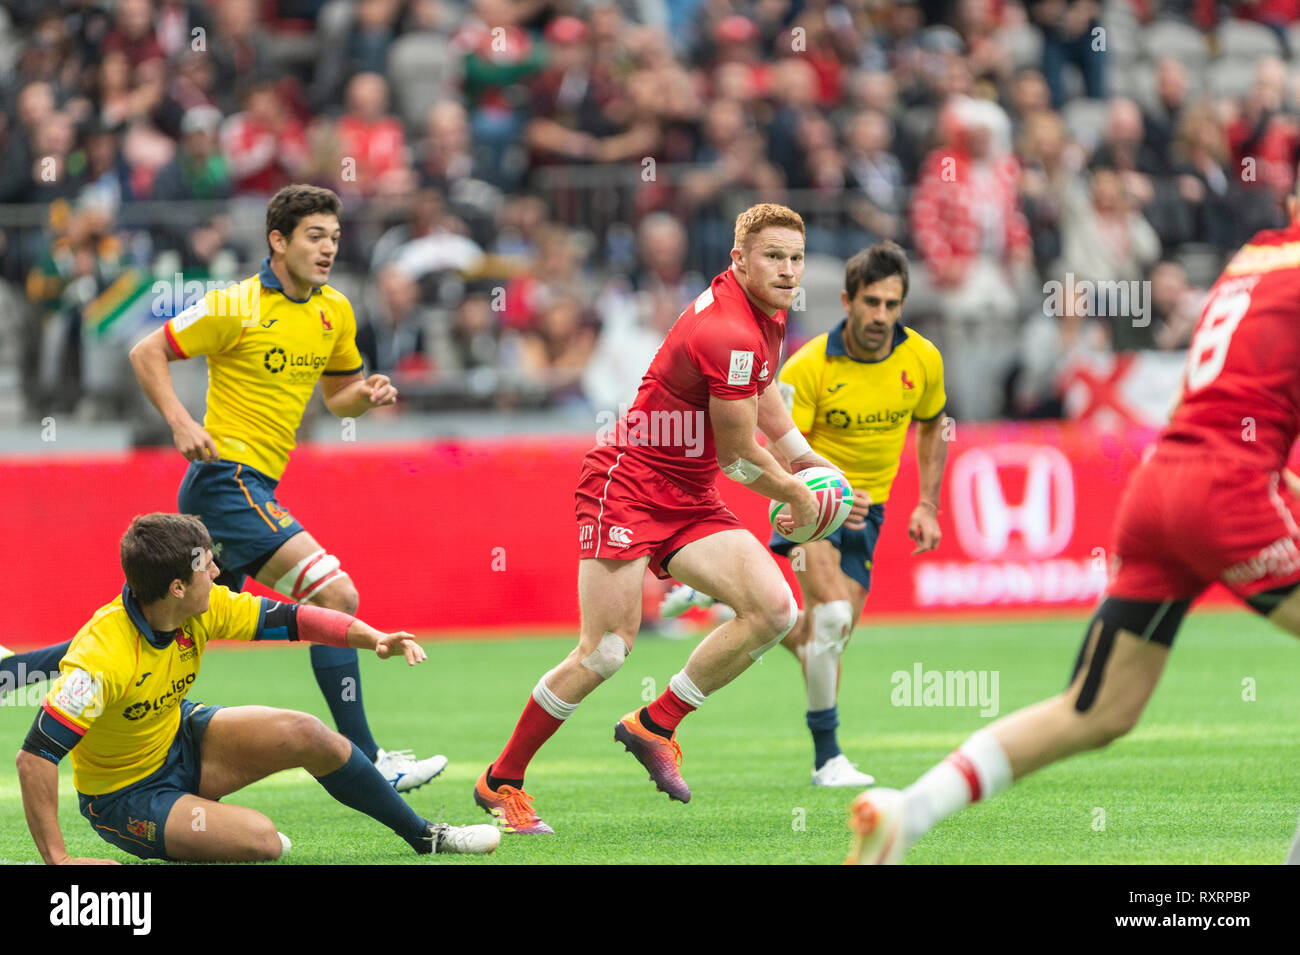 Vancouver, Canada. 10 March, 2019.  Connor Braid of Canada running with the ball. 2019 HSBC Canada Sevens Rugby - Day Two, BC Place Stadium. © Gerry Rousseau/Alamy Live News Stock Photo